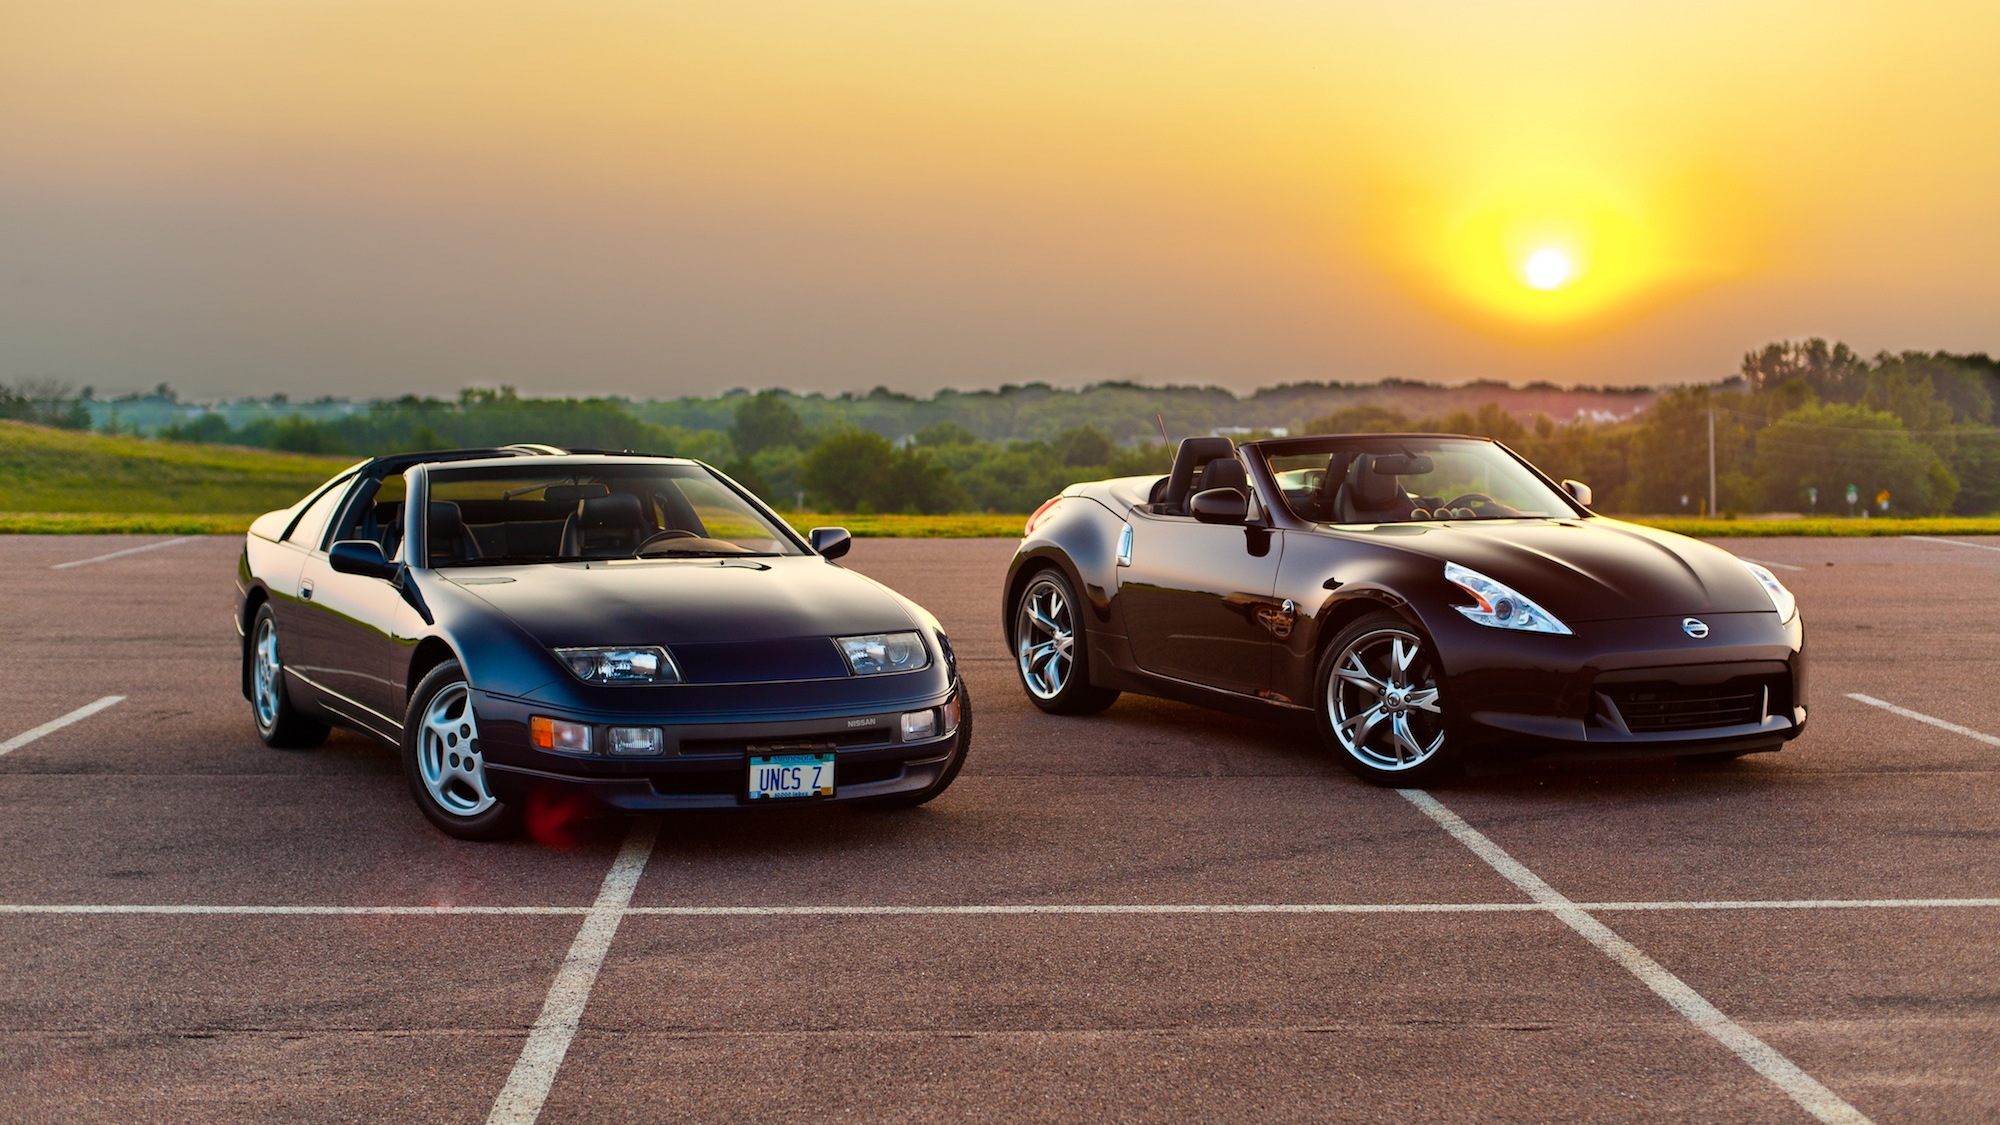 2011 Nissan 370Z And 1990 Nissan 300ZX. Photos by Alex Bellus